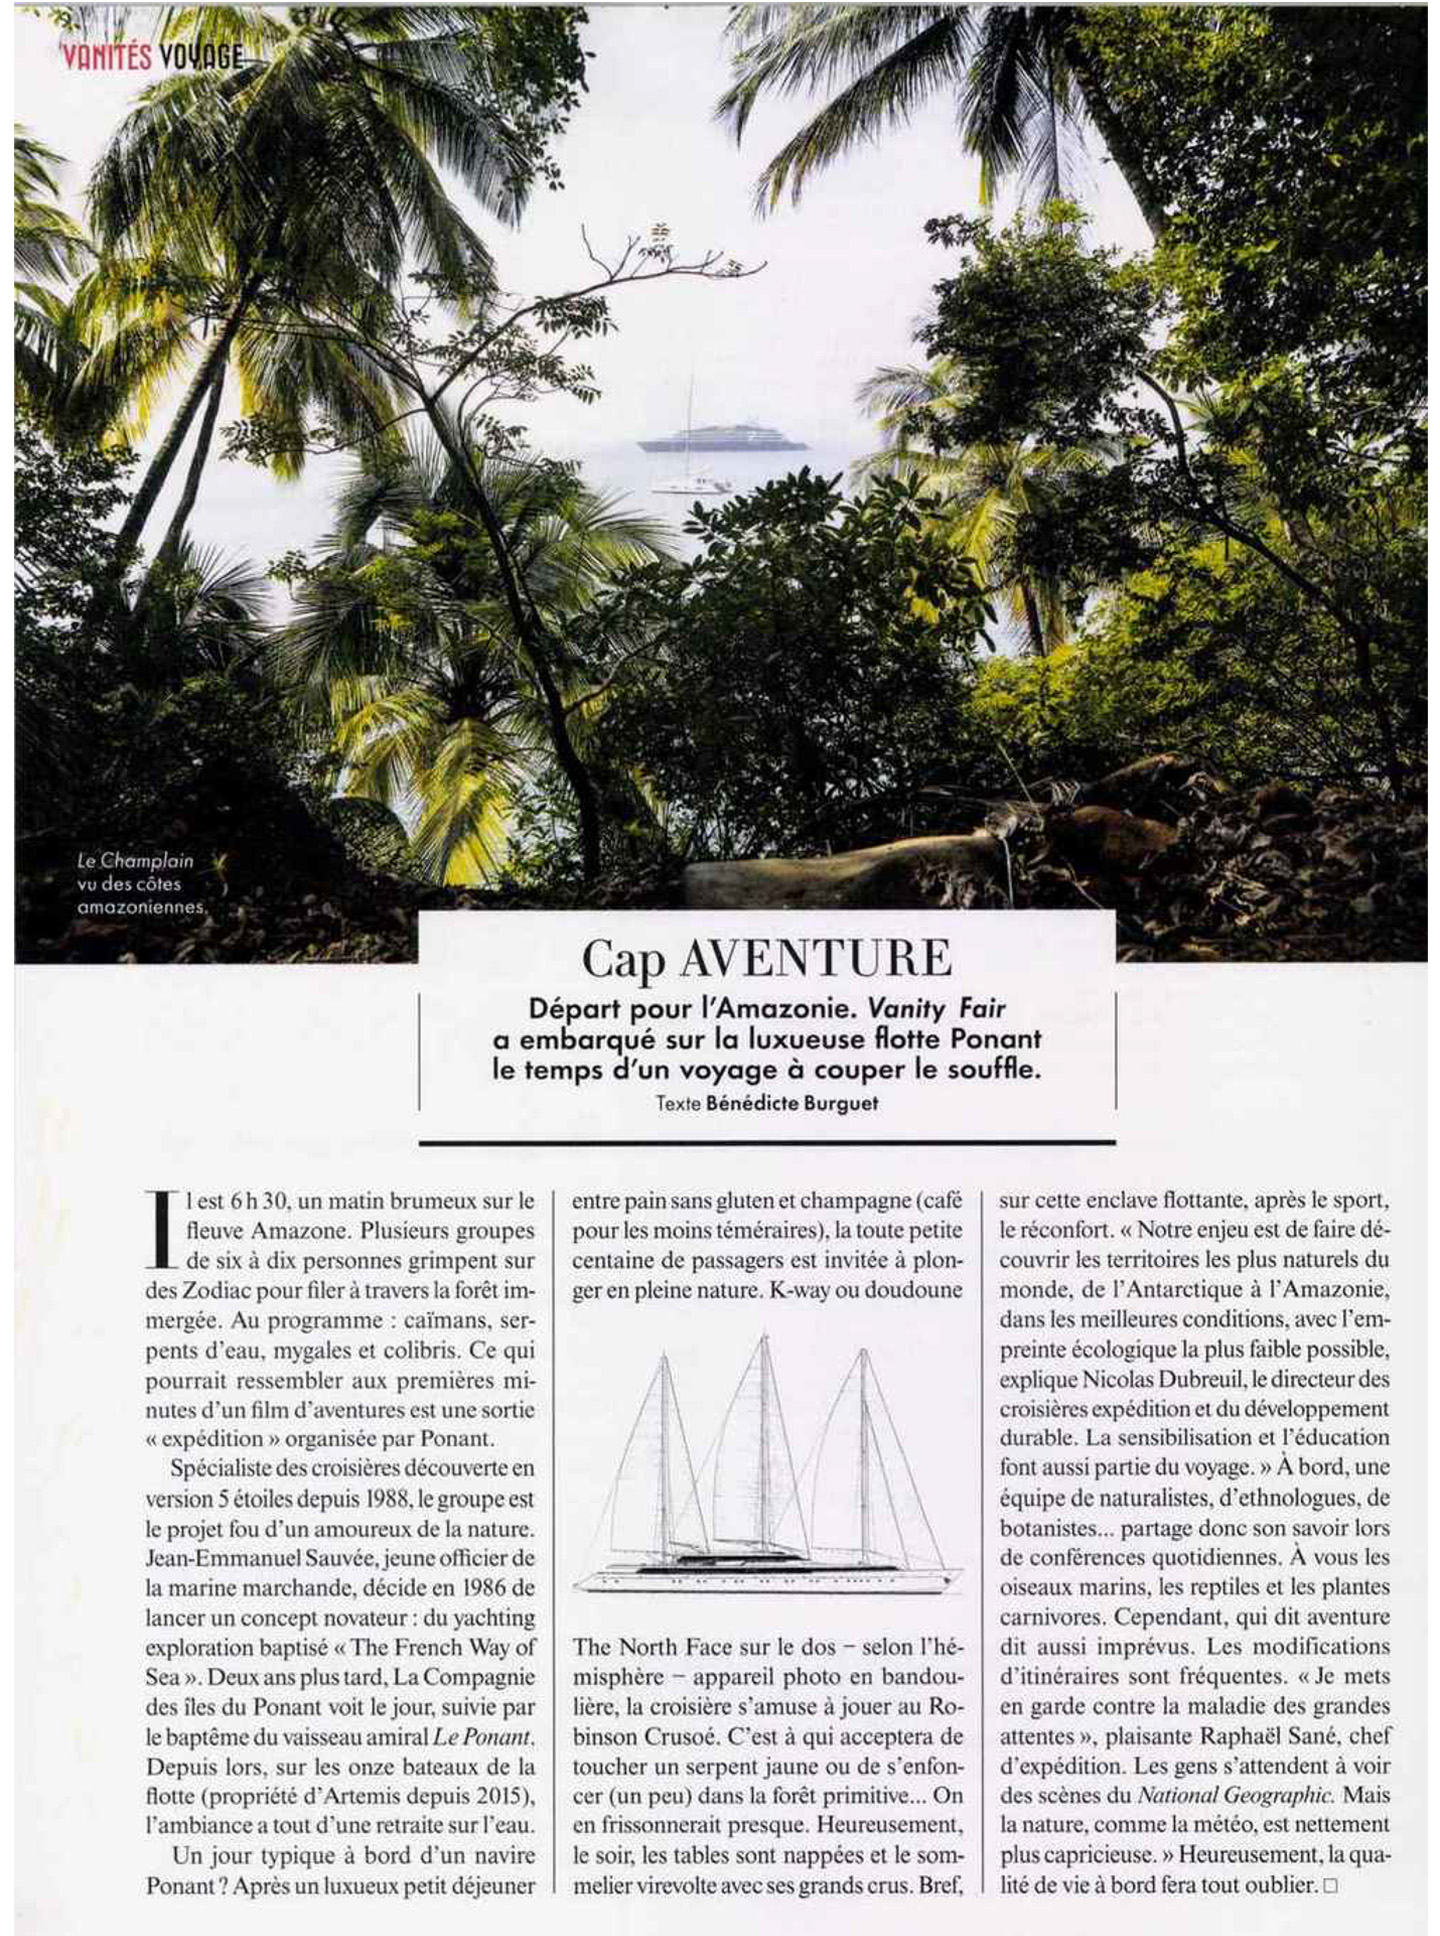 Article on the champlain, one of the 6 explorers of the compagnie du ponant realized by the studio jean-Philippe Nuel in the magazine vanity fair, luxury cruise ship, interiordesign, architecture, interior design